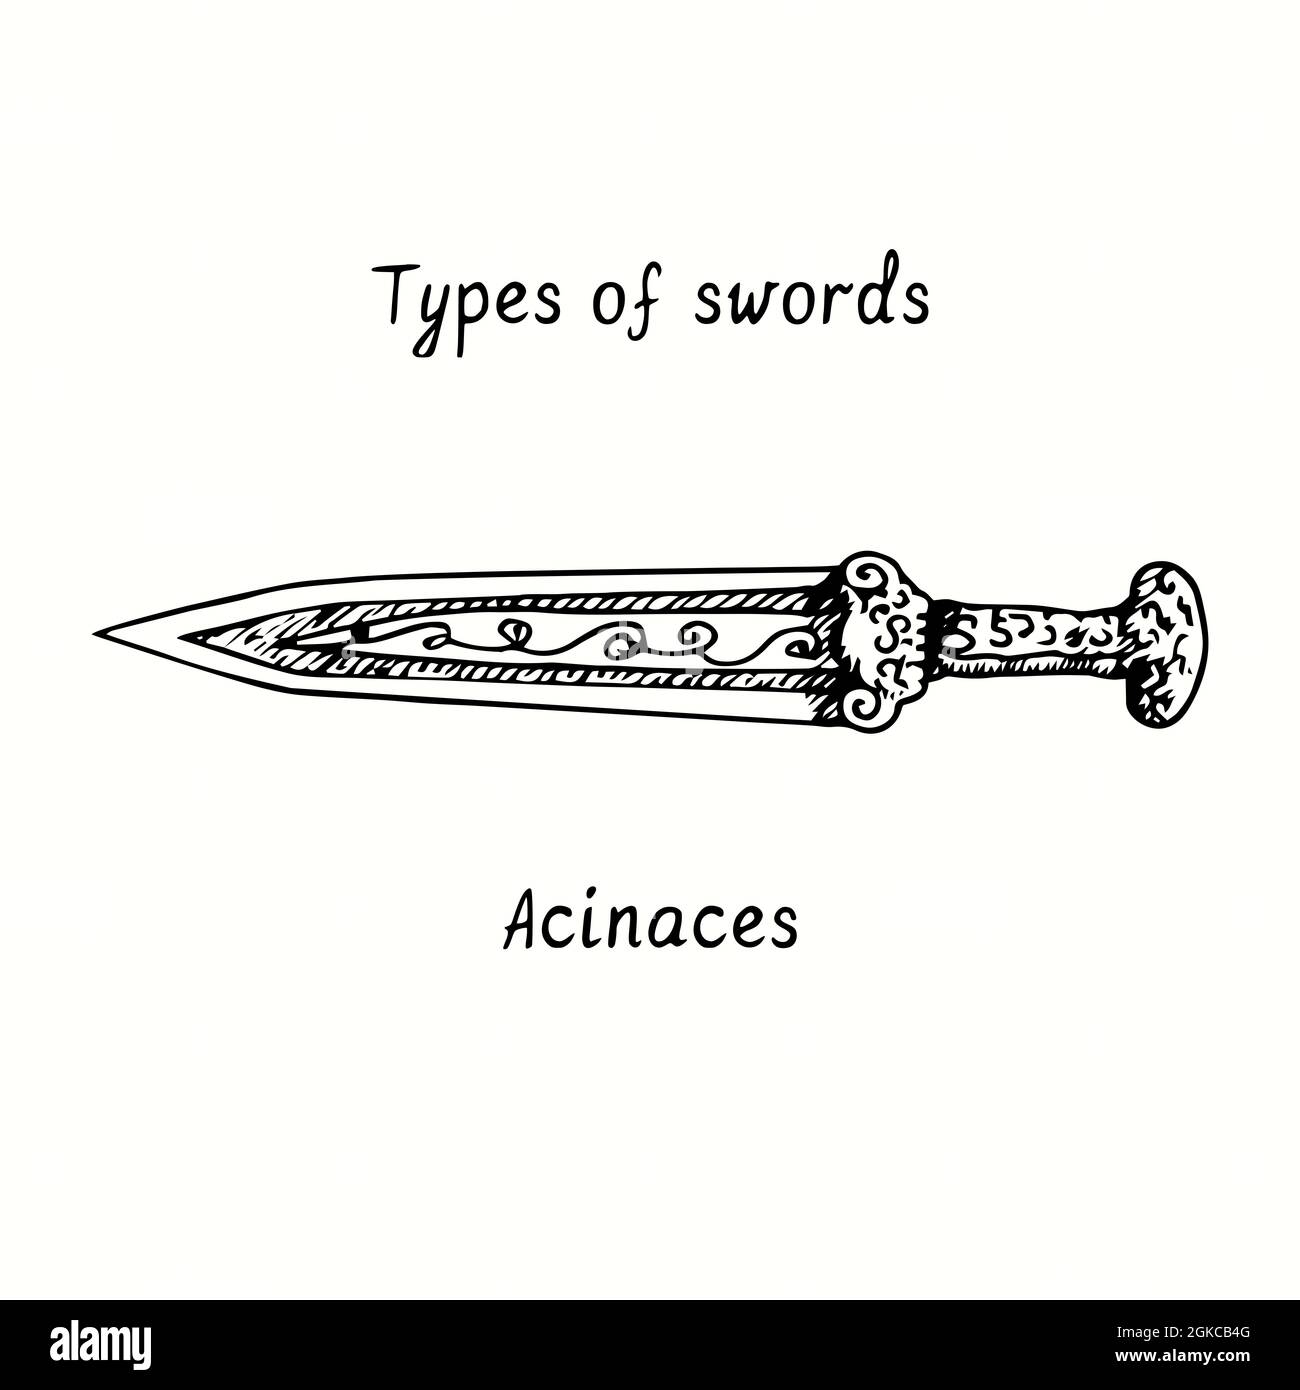 Types of swords. Acinaces. Ink black and white doodle drawing in woodcut style. Stock Photo